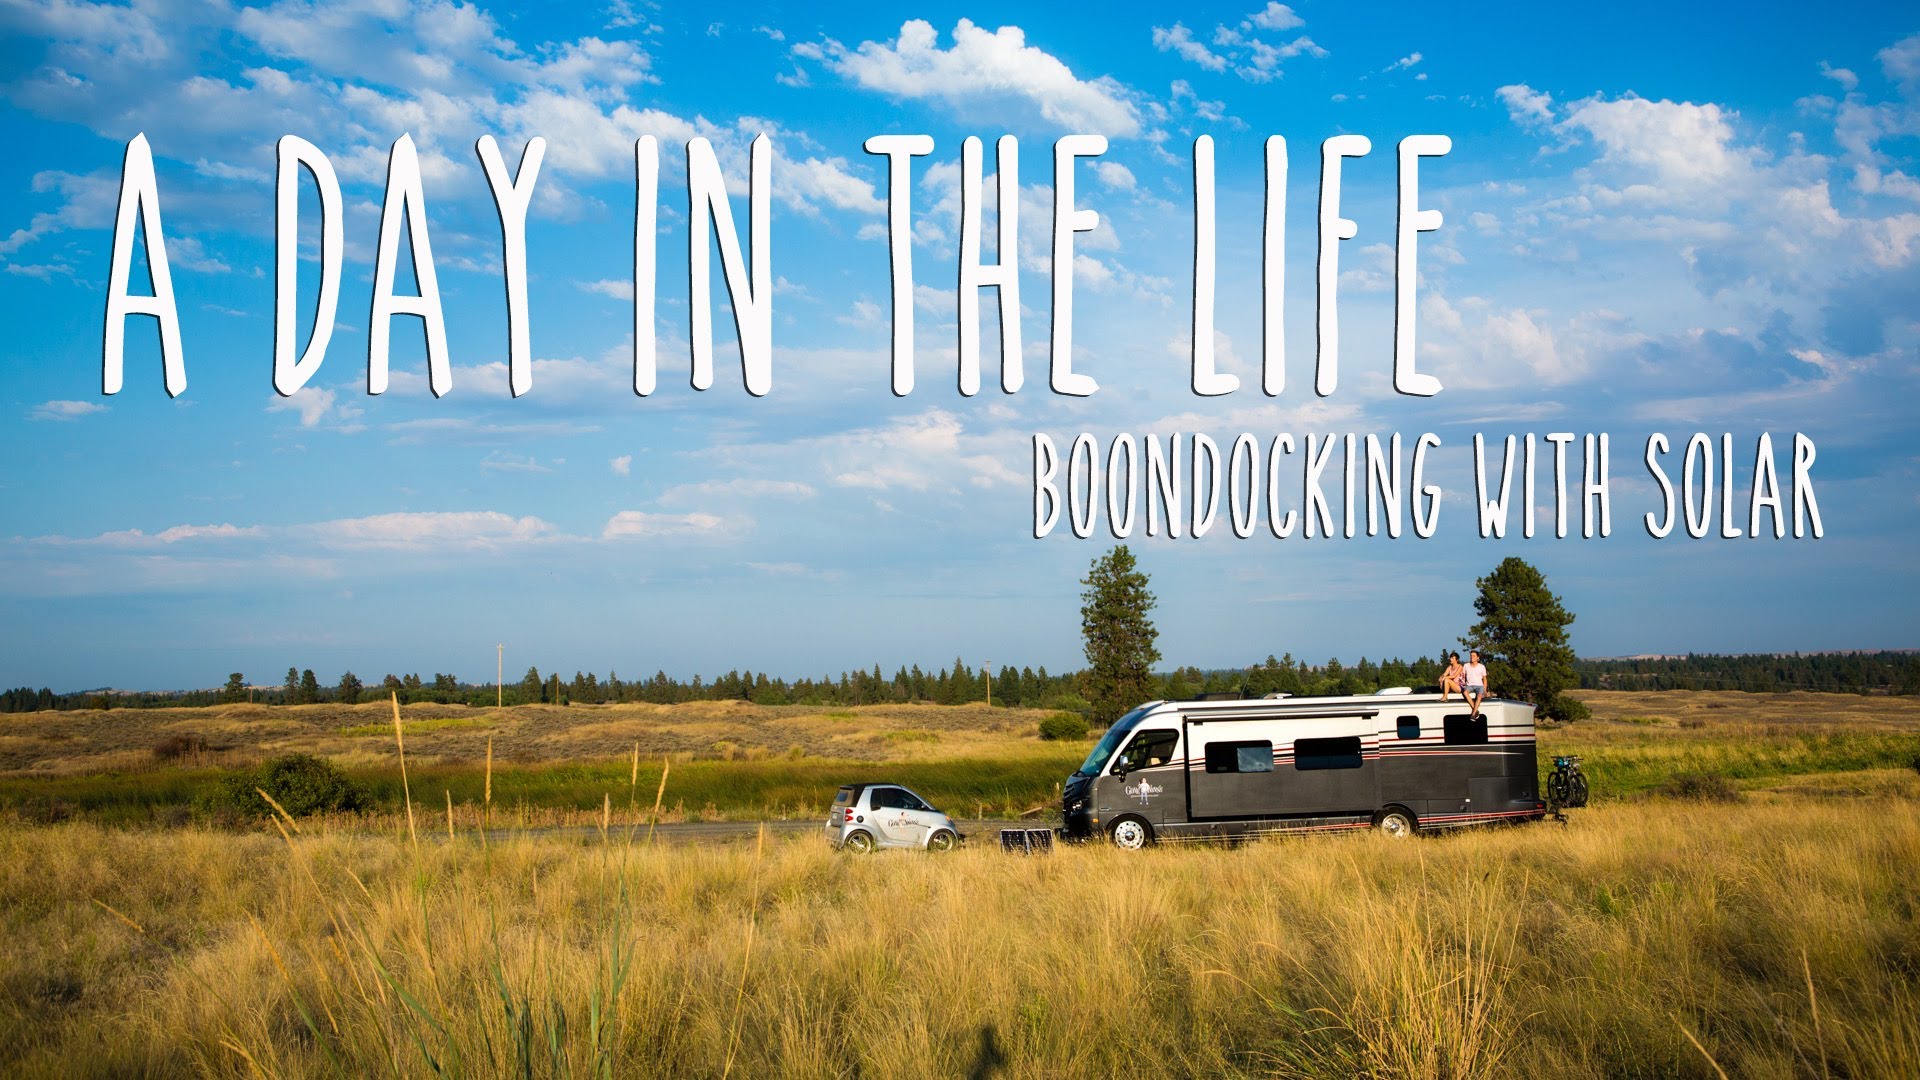 Couple Uses Affordable Solar Panel System To Power Their Full-Time RV Lifestyle...